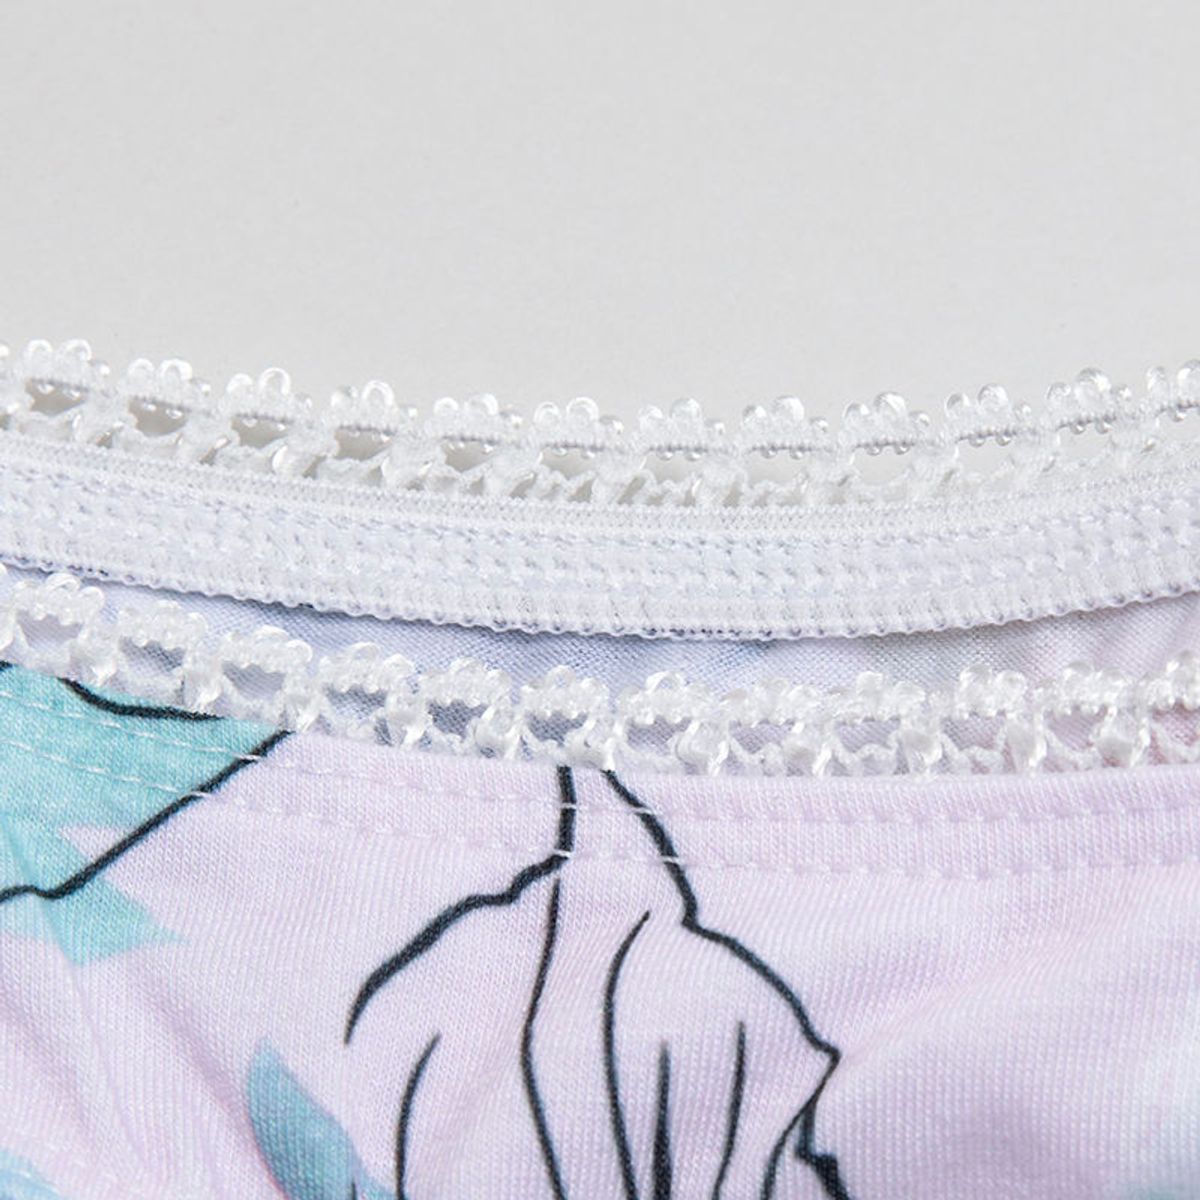 Custom Panties Personalized With Your Words Custom Printed Panties  Customized Booty Womens Underwear -  Canada